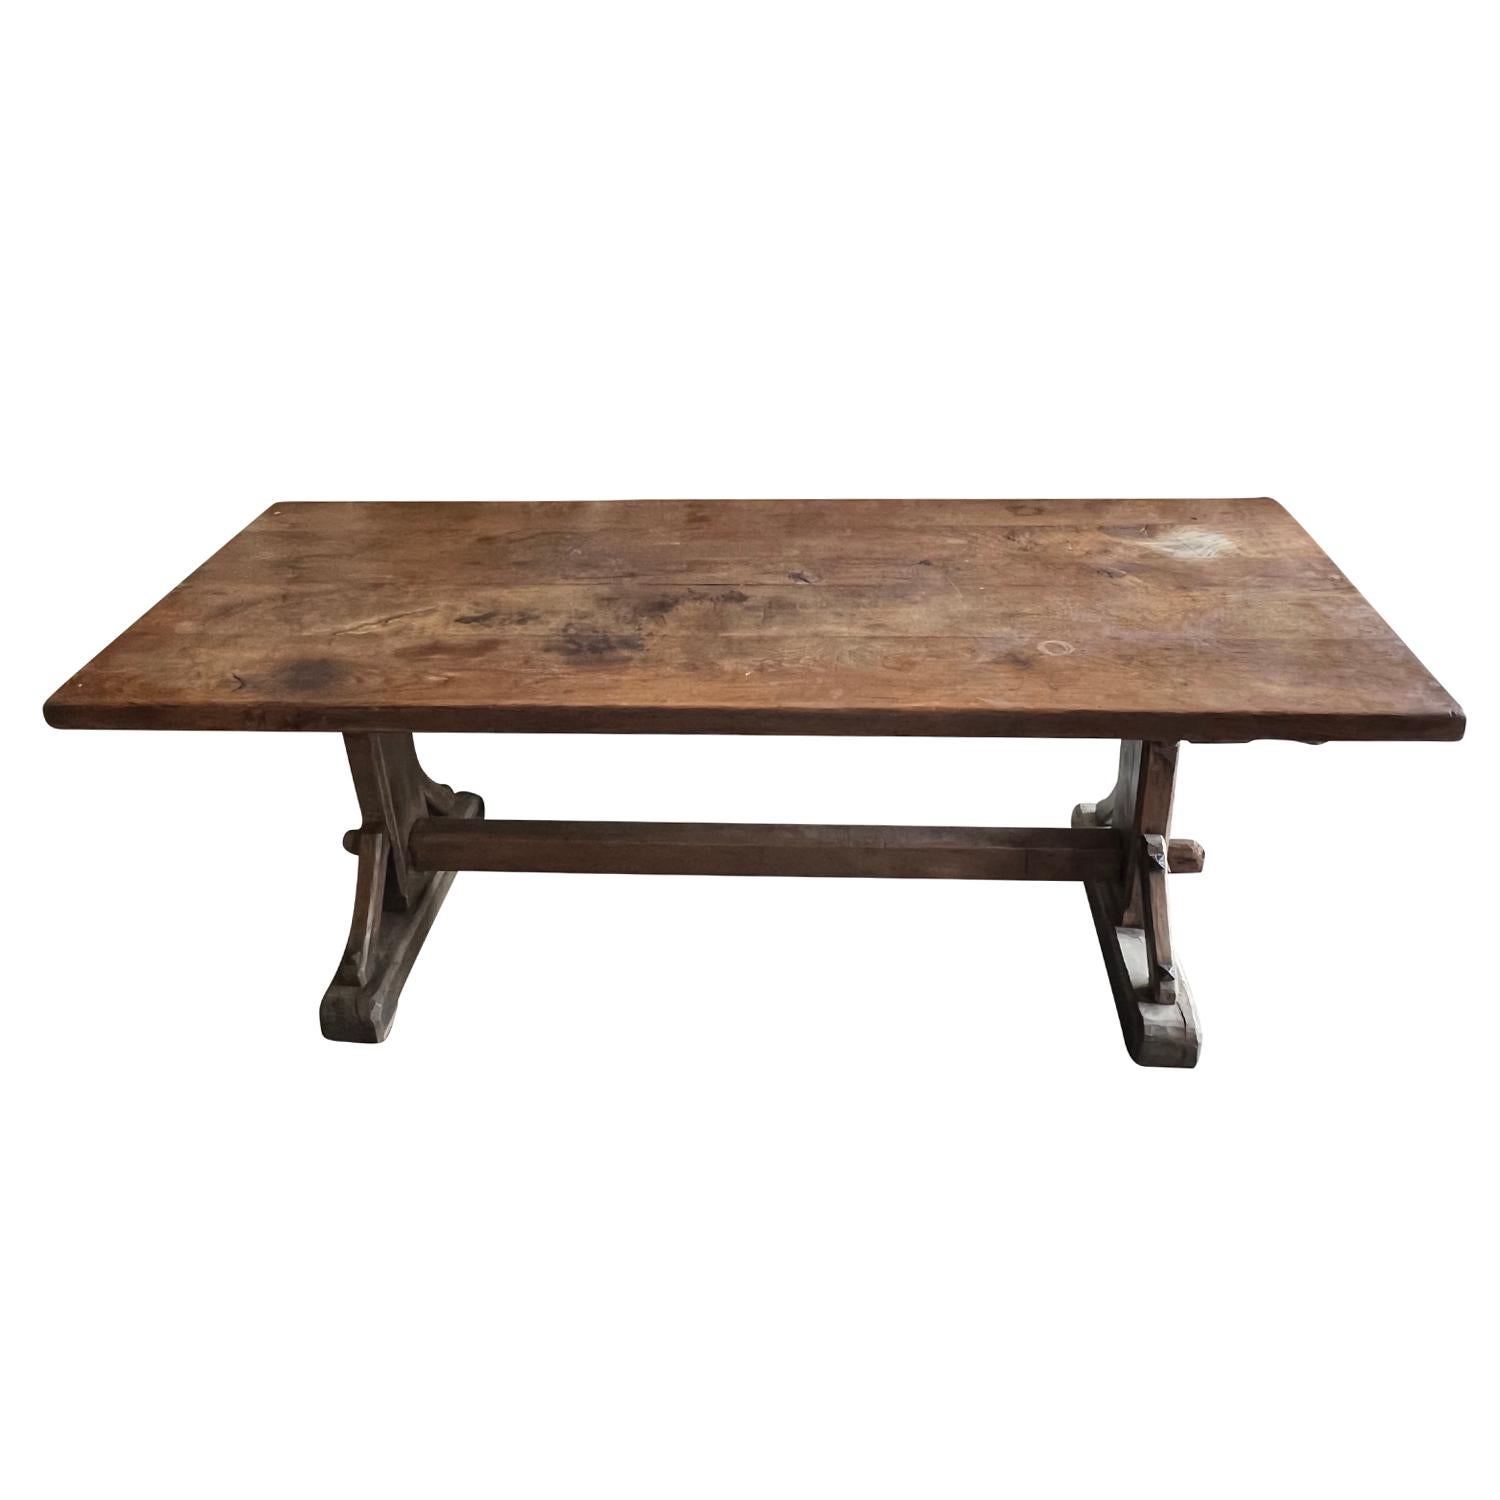 A 19th century wooden trestle table made of hand crafted Walnut, in good condition. The massive plank top rests on carved legs and is joined by a stretcher. The antique French table has beautifully weathered to a subtle patina revealing glimpses of